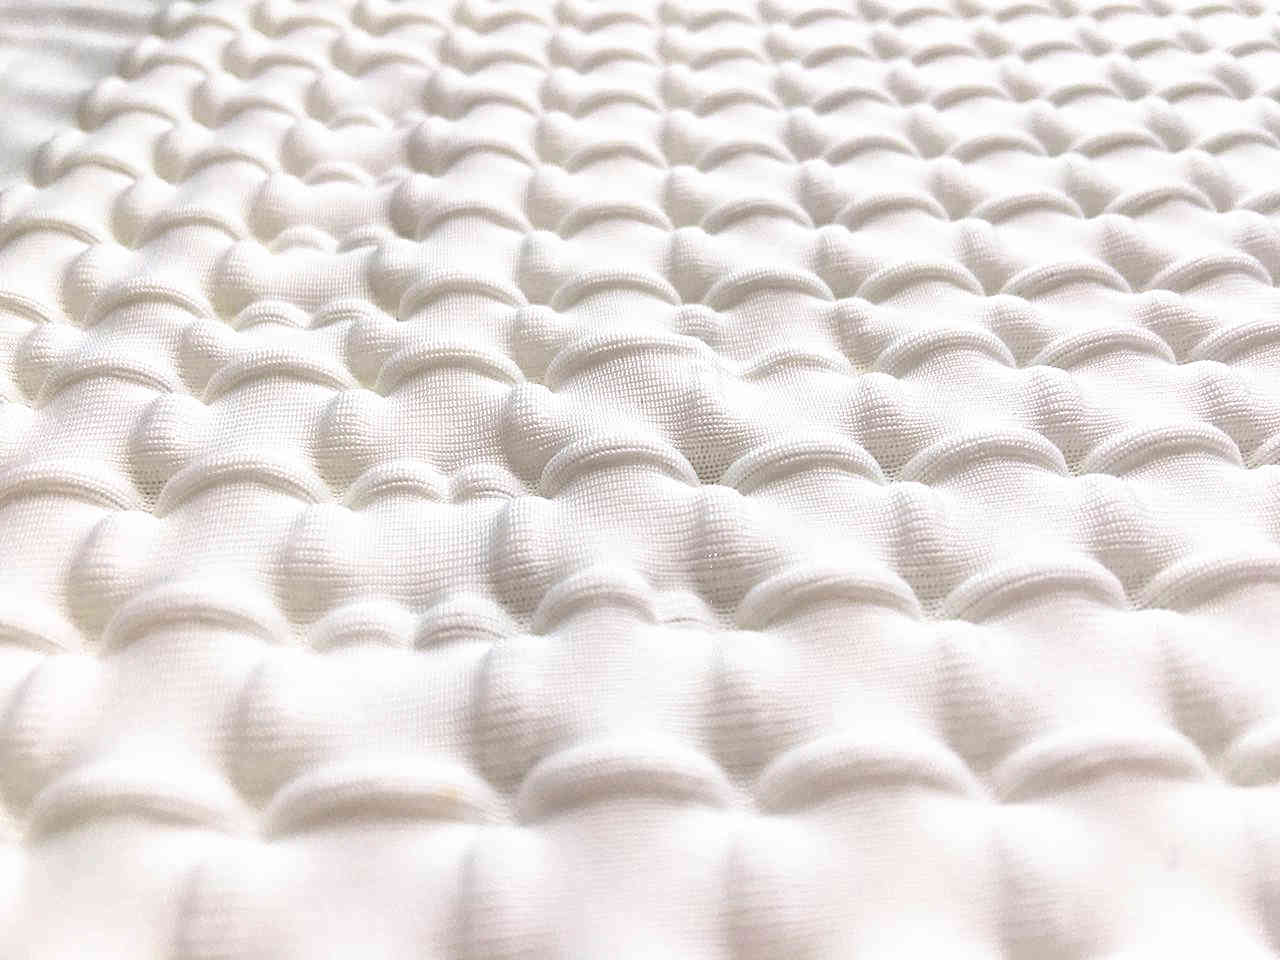 Polyester expanded crease pulp